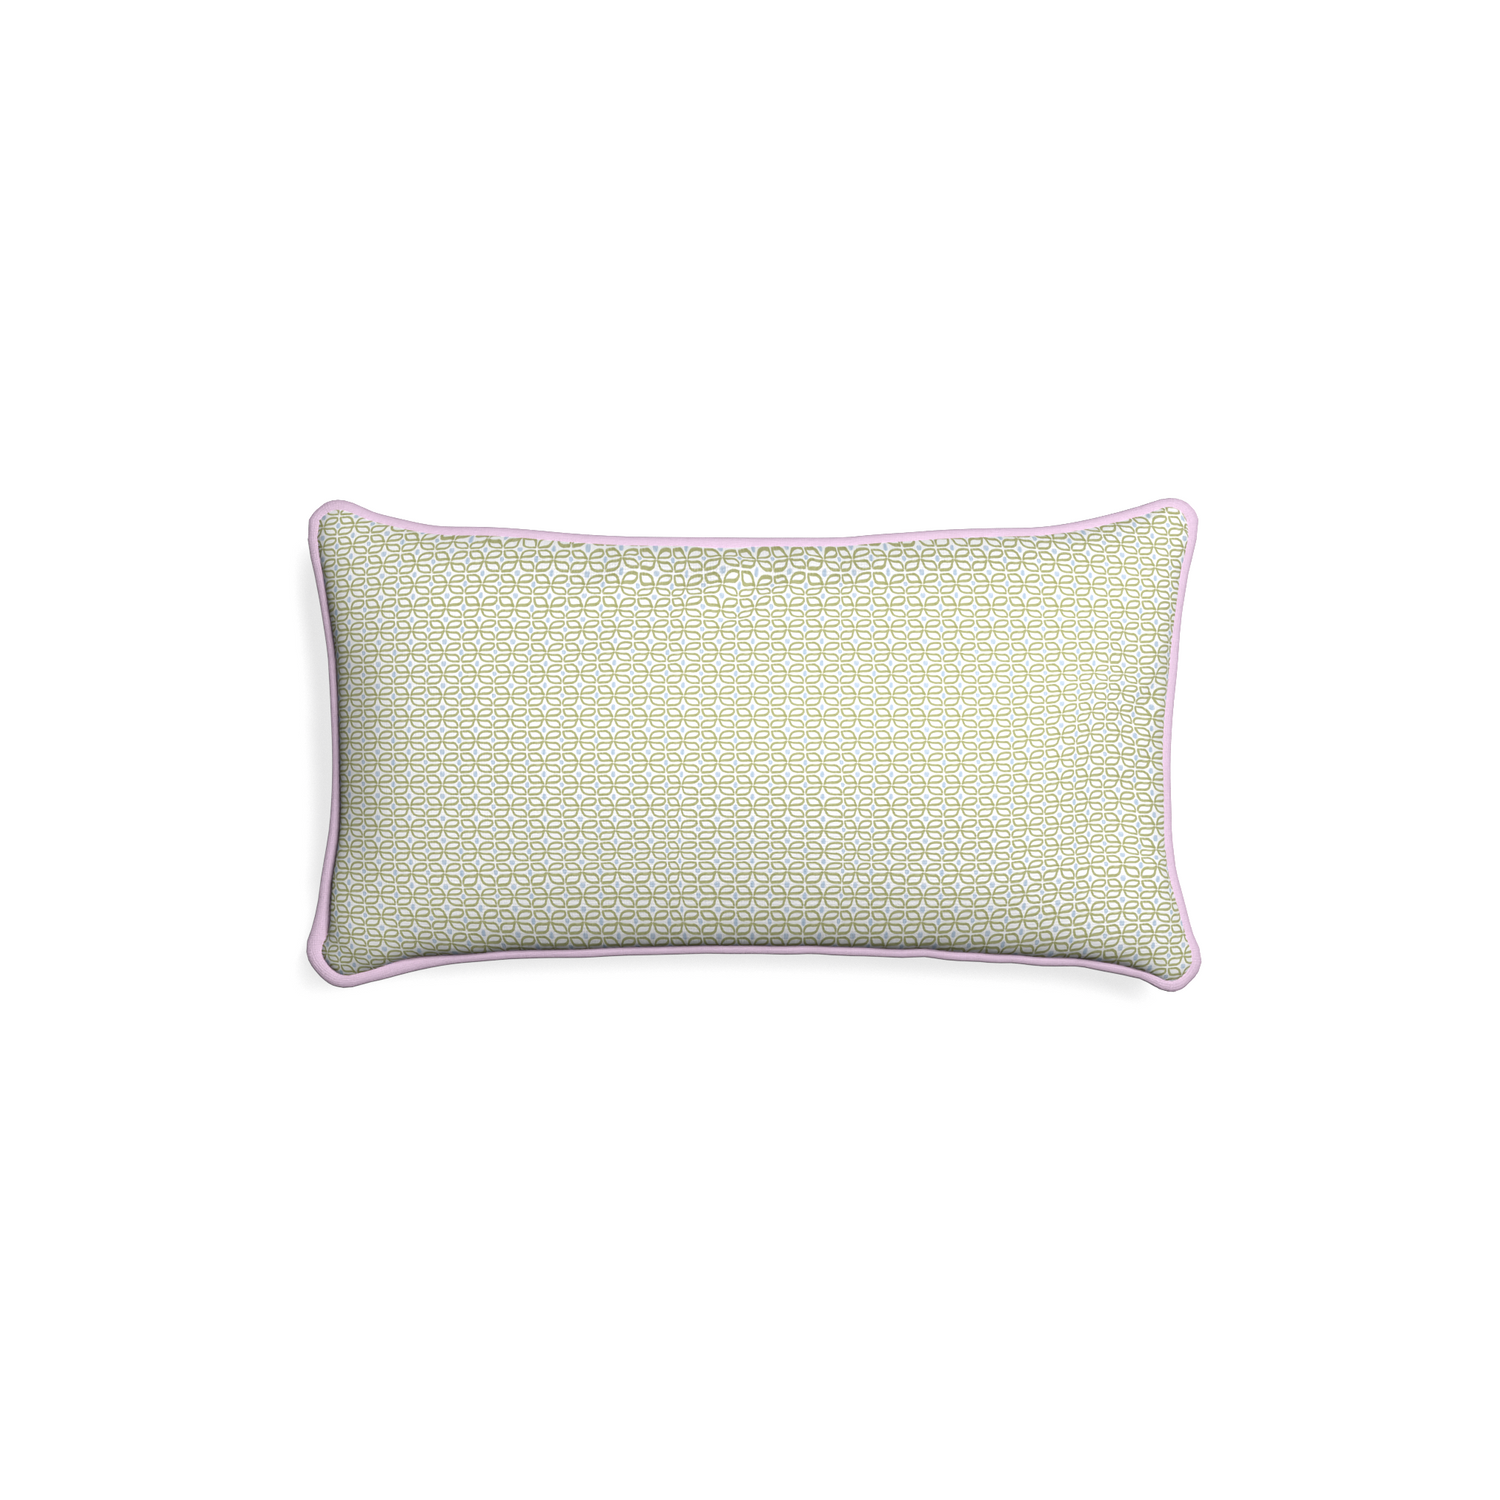 Petite-lumbar loomi moss custom moss green geometricpillow with l piping on white background